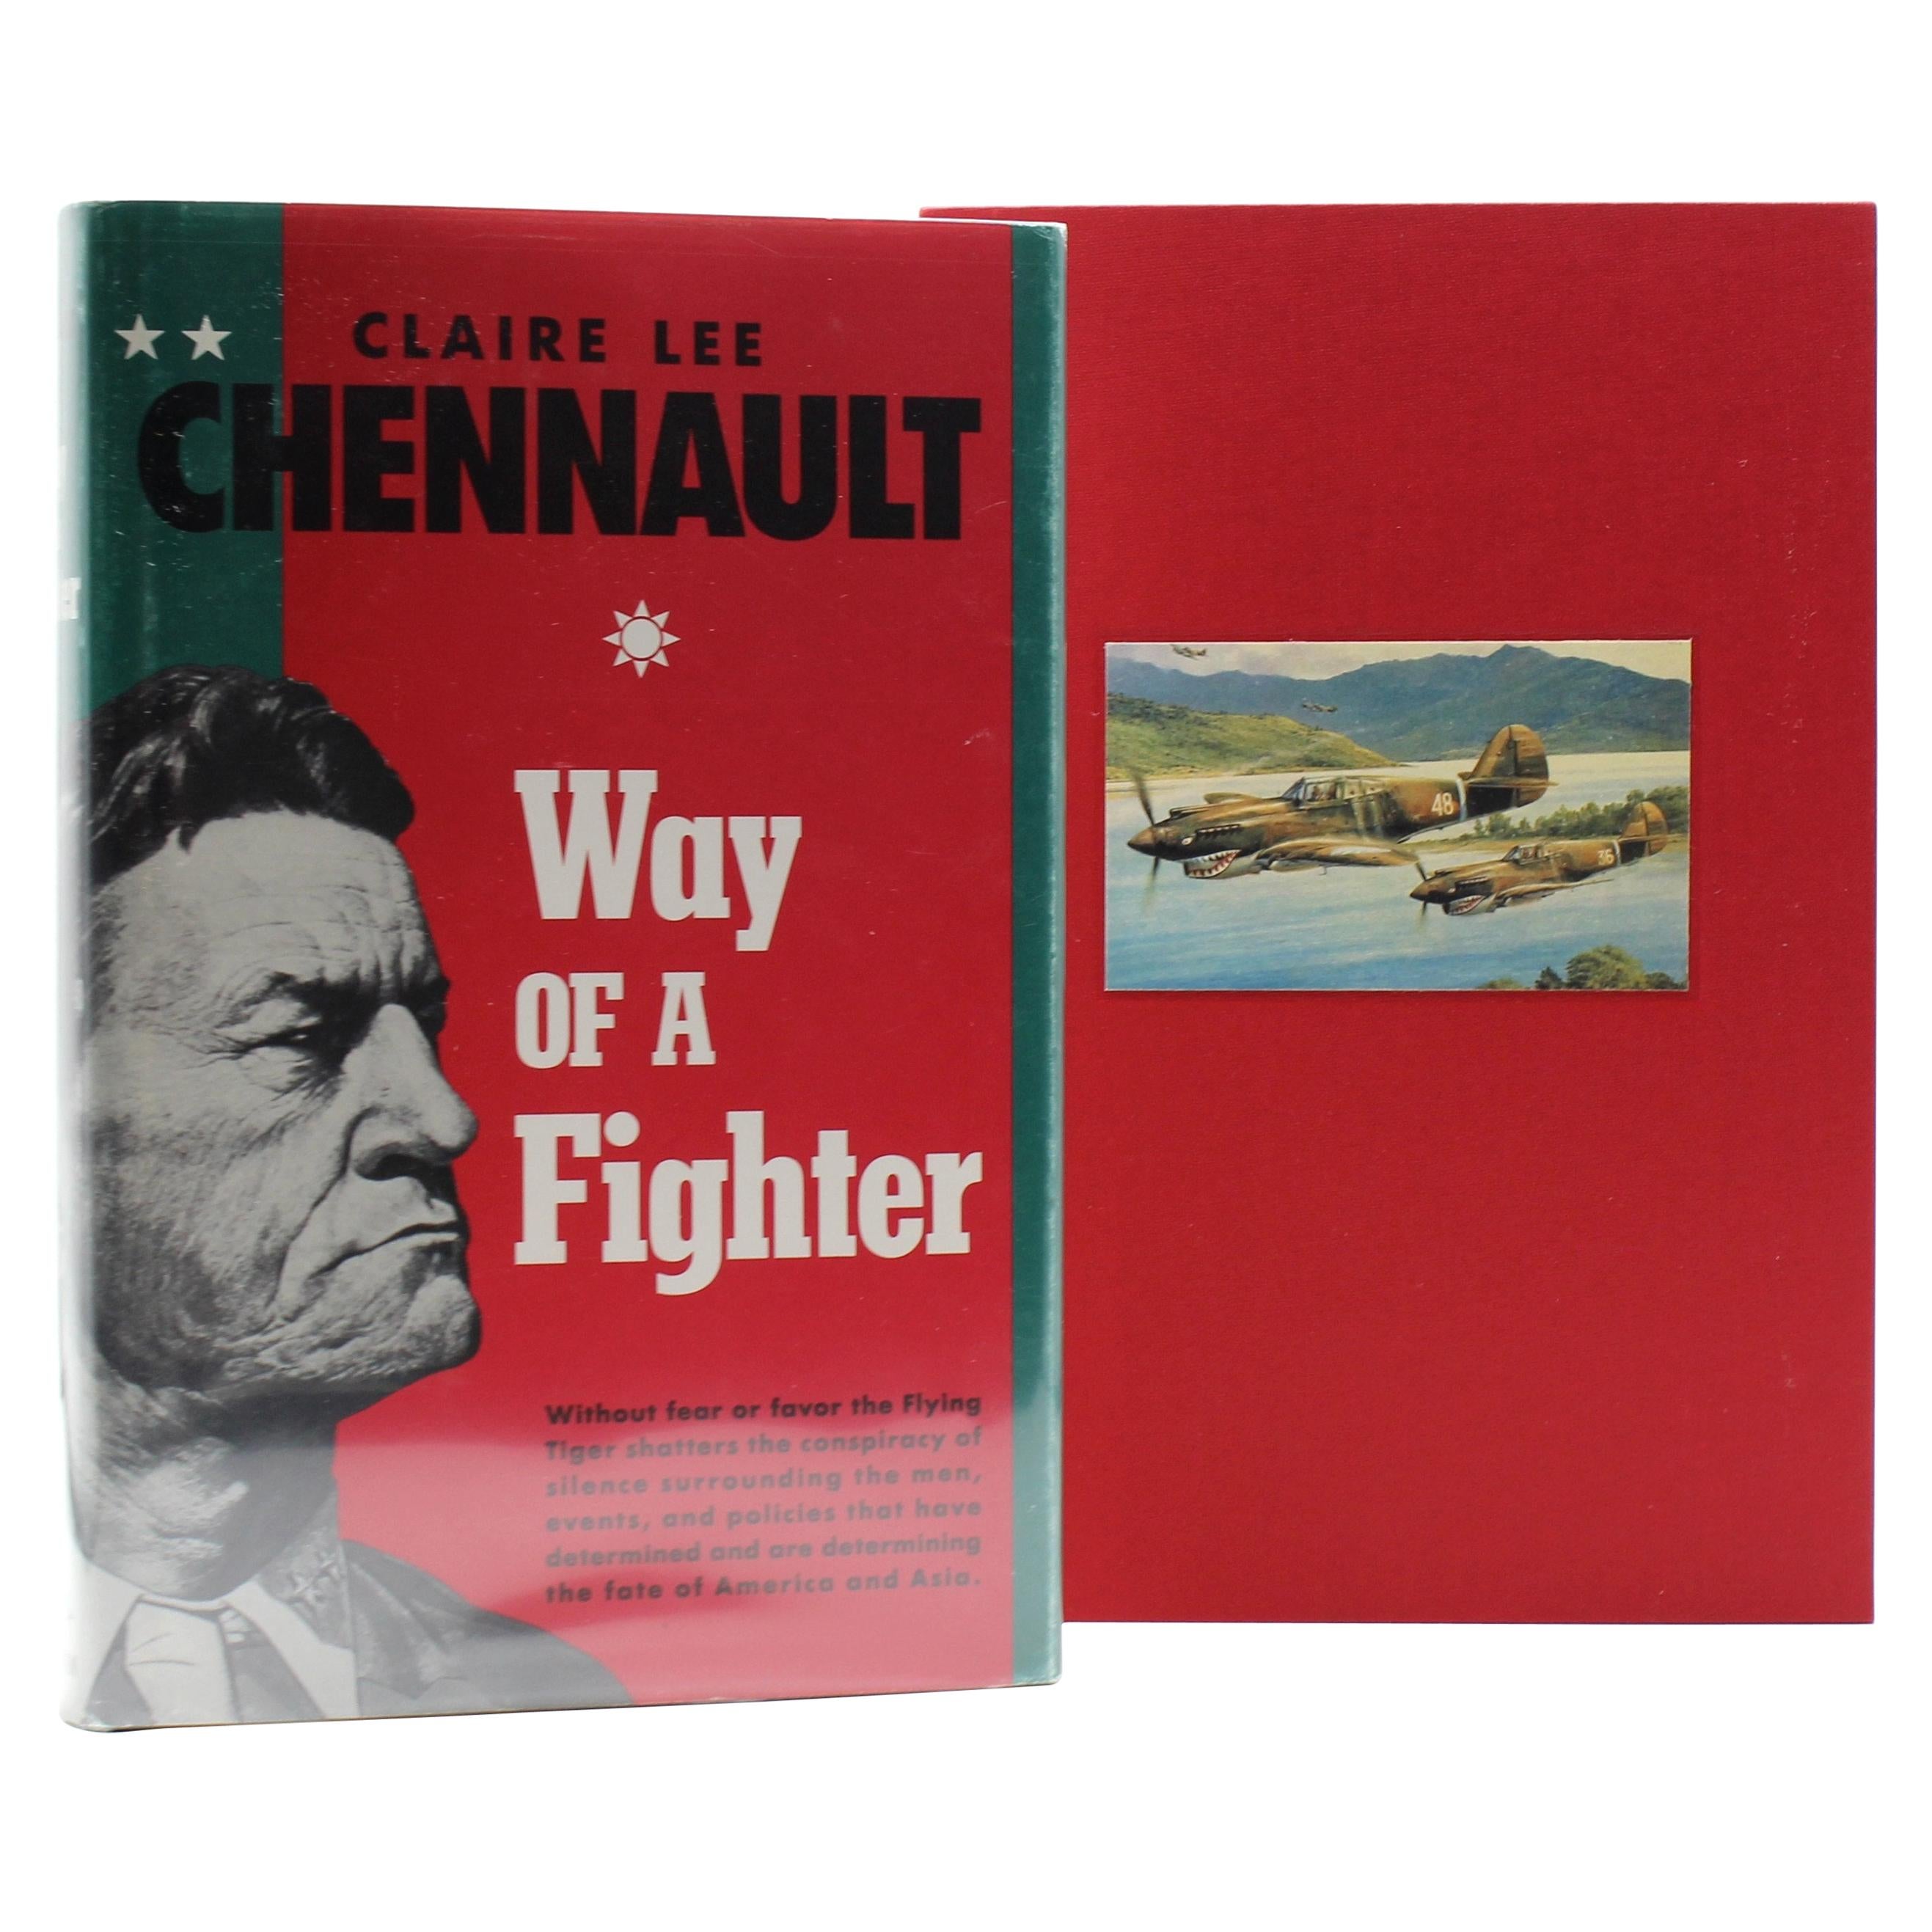 Way of a Fighter by Claire Lee Chennault, Signed Limited Edition